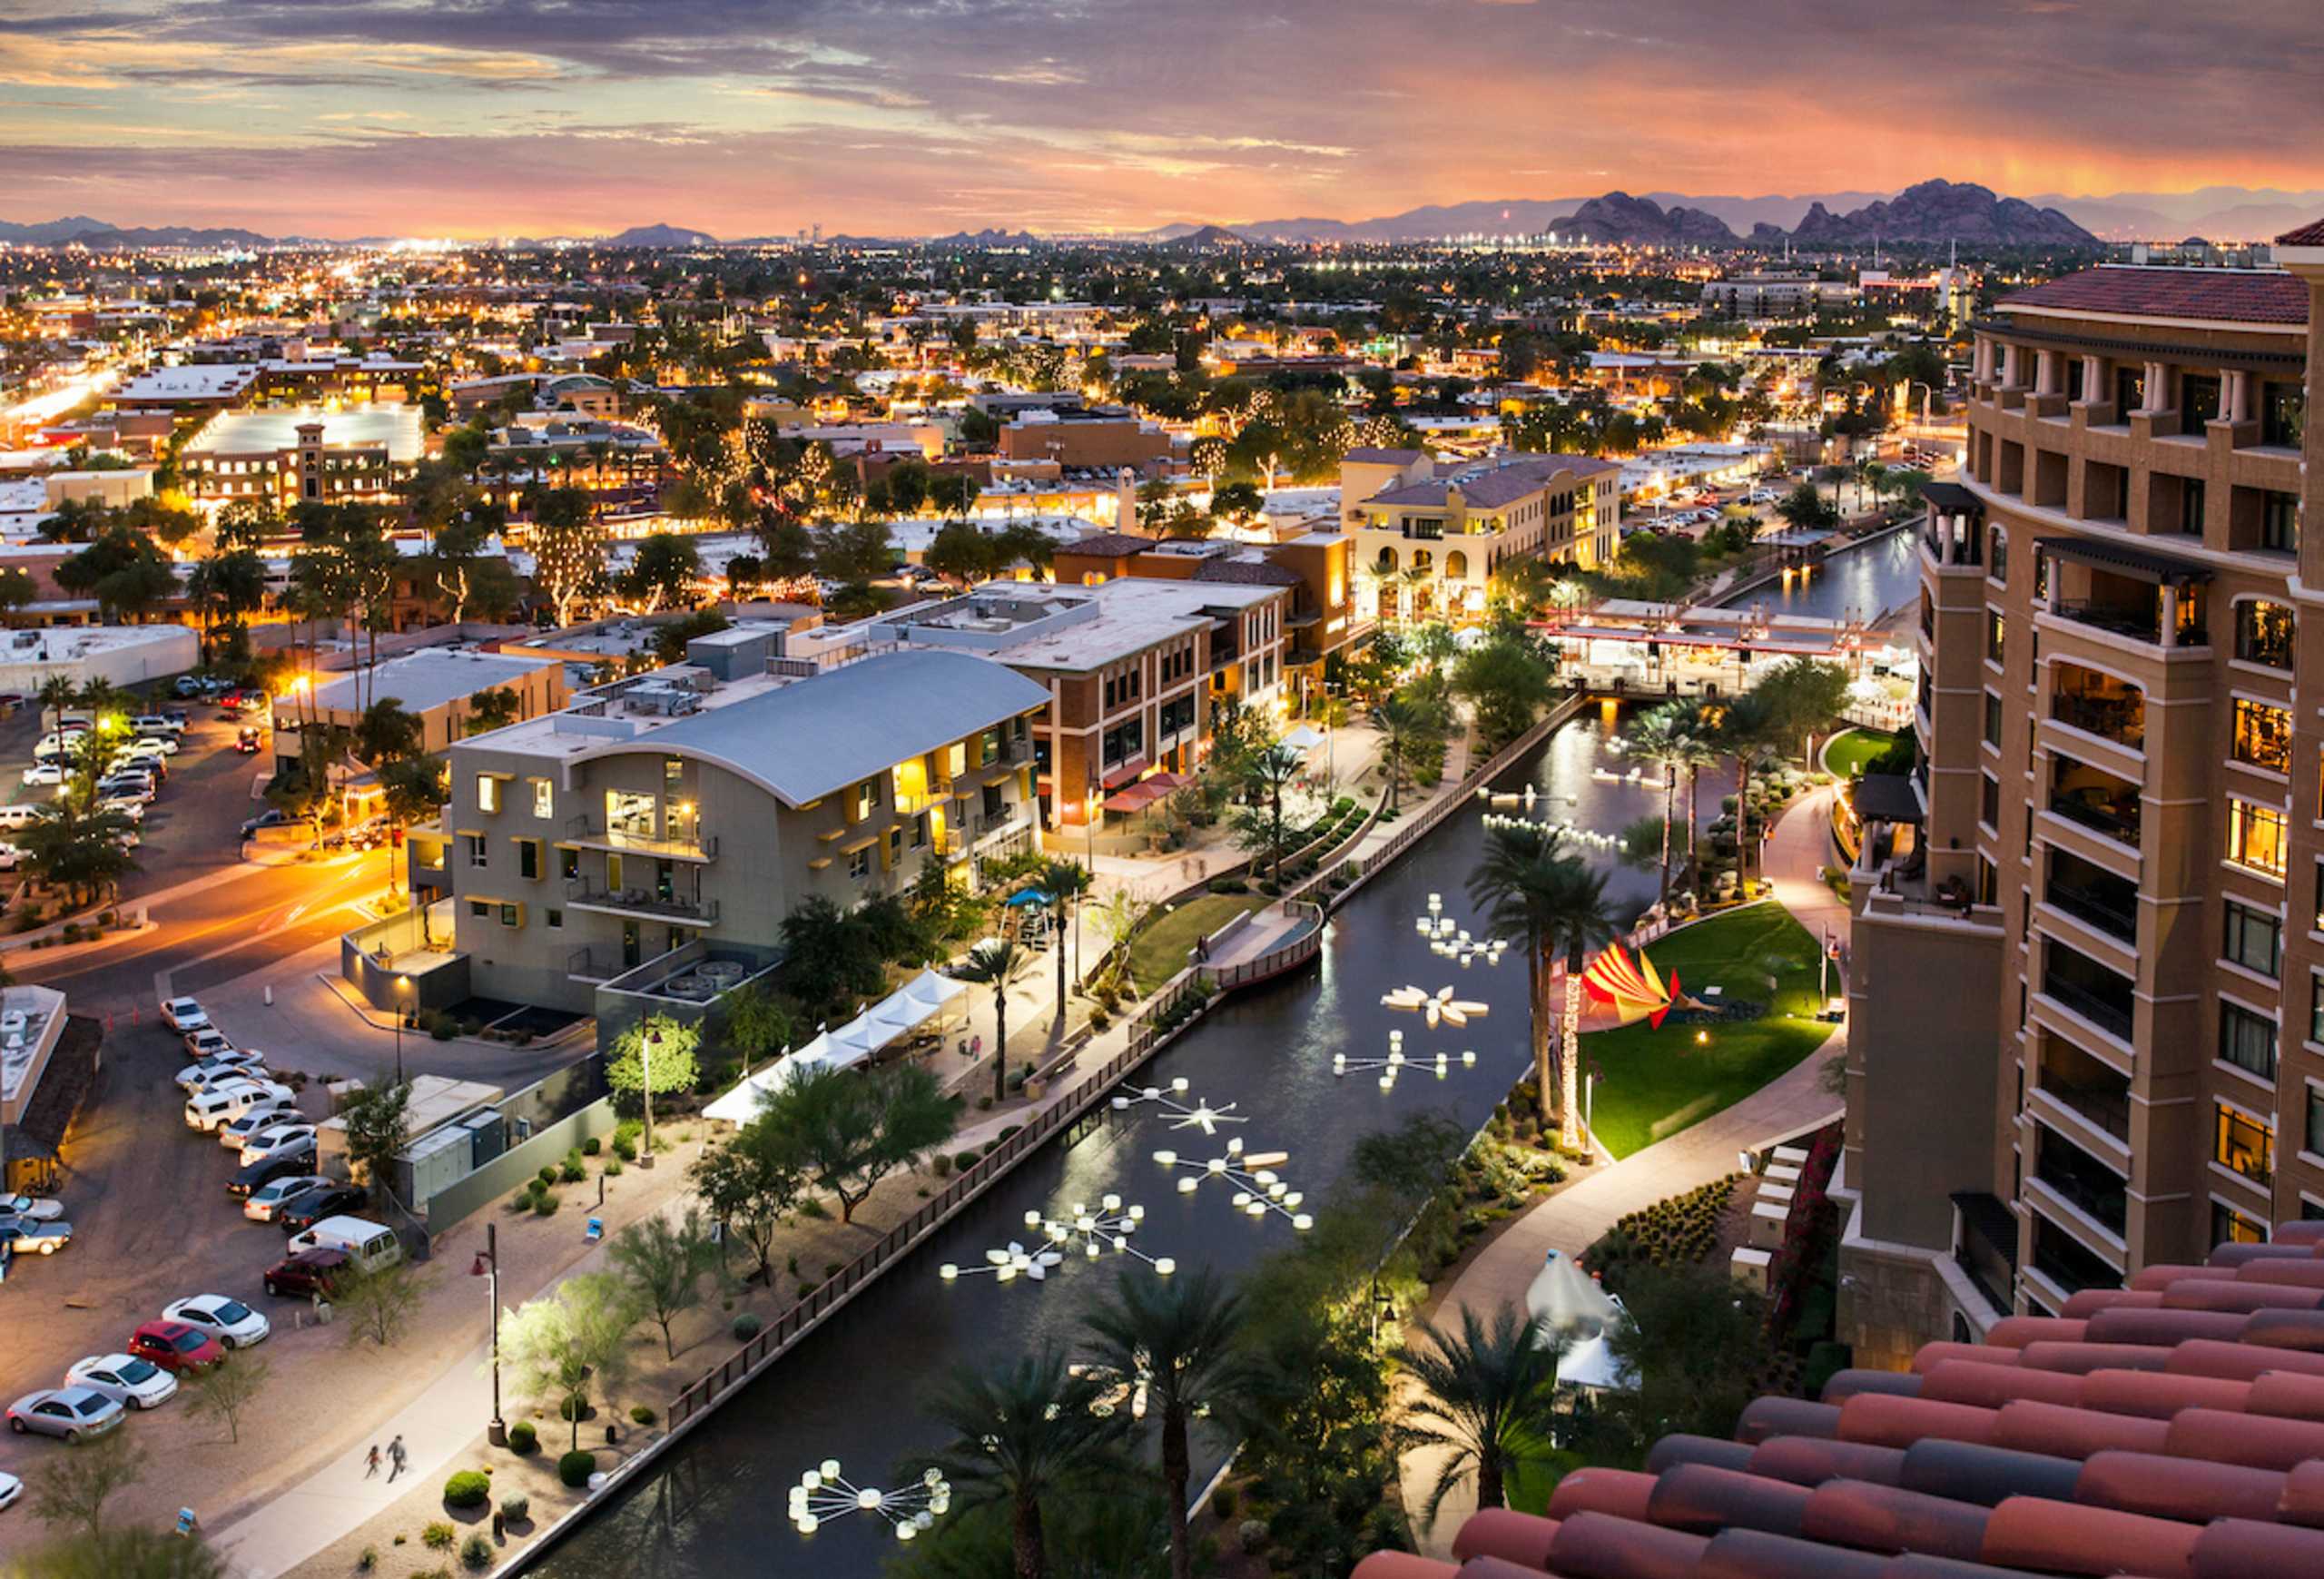 Old Town Scottsdale - Hub of Shopping, Fine Dining & Nightlife